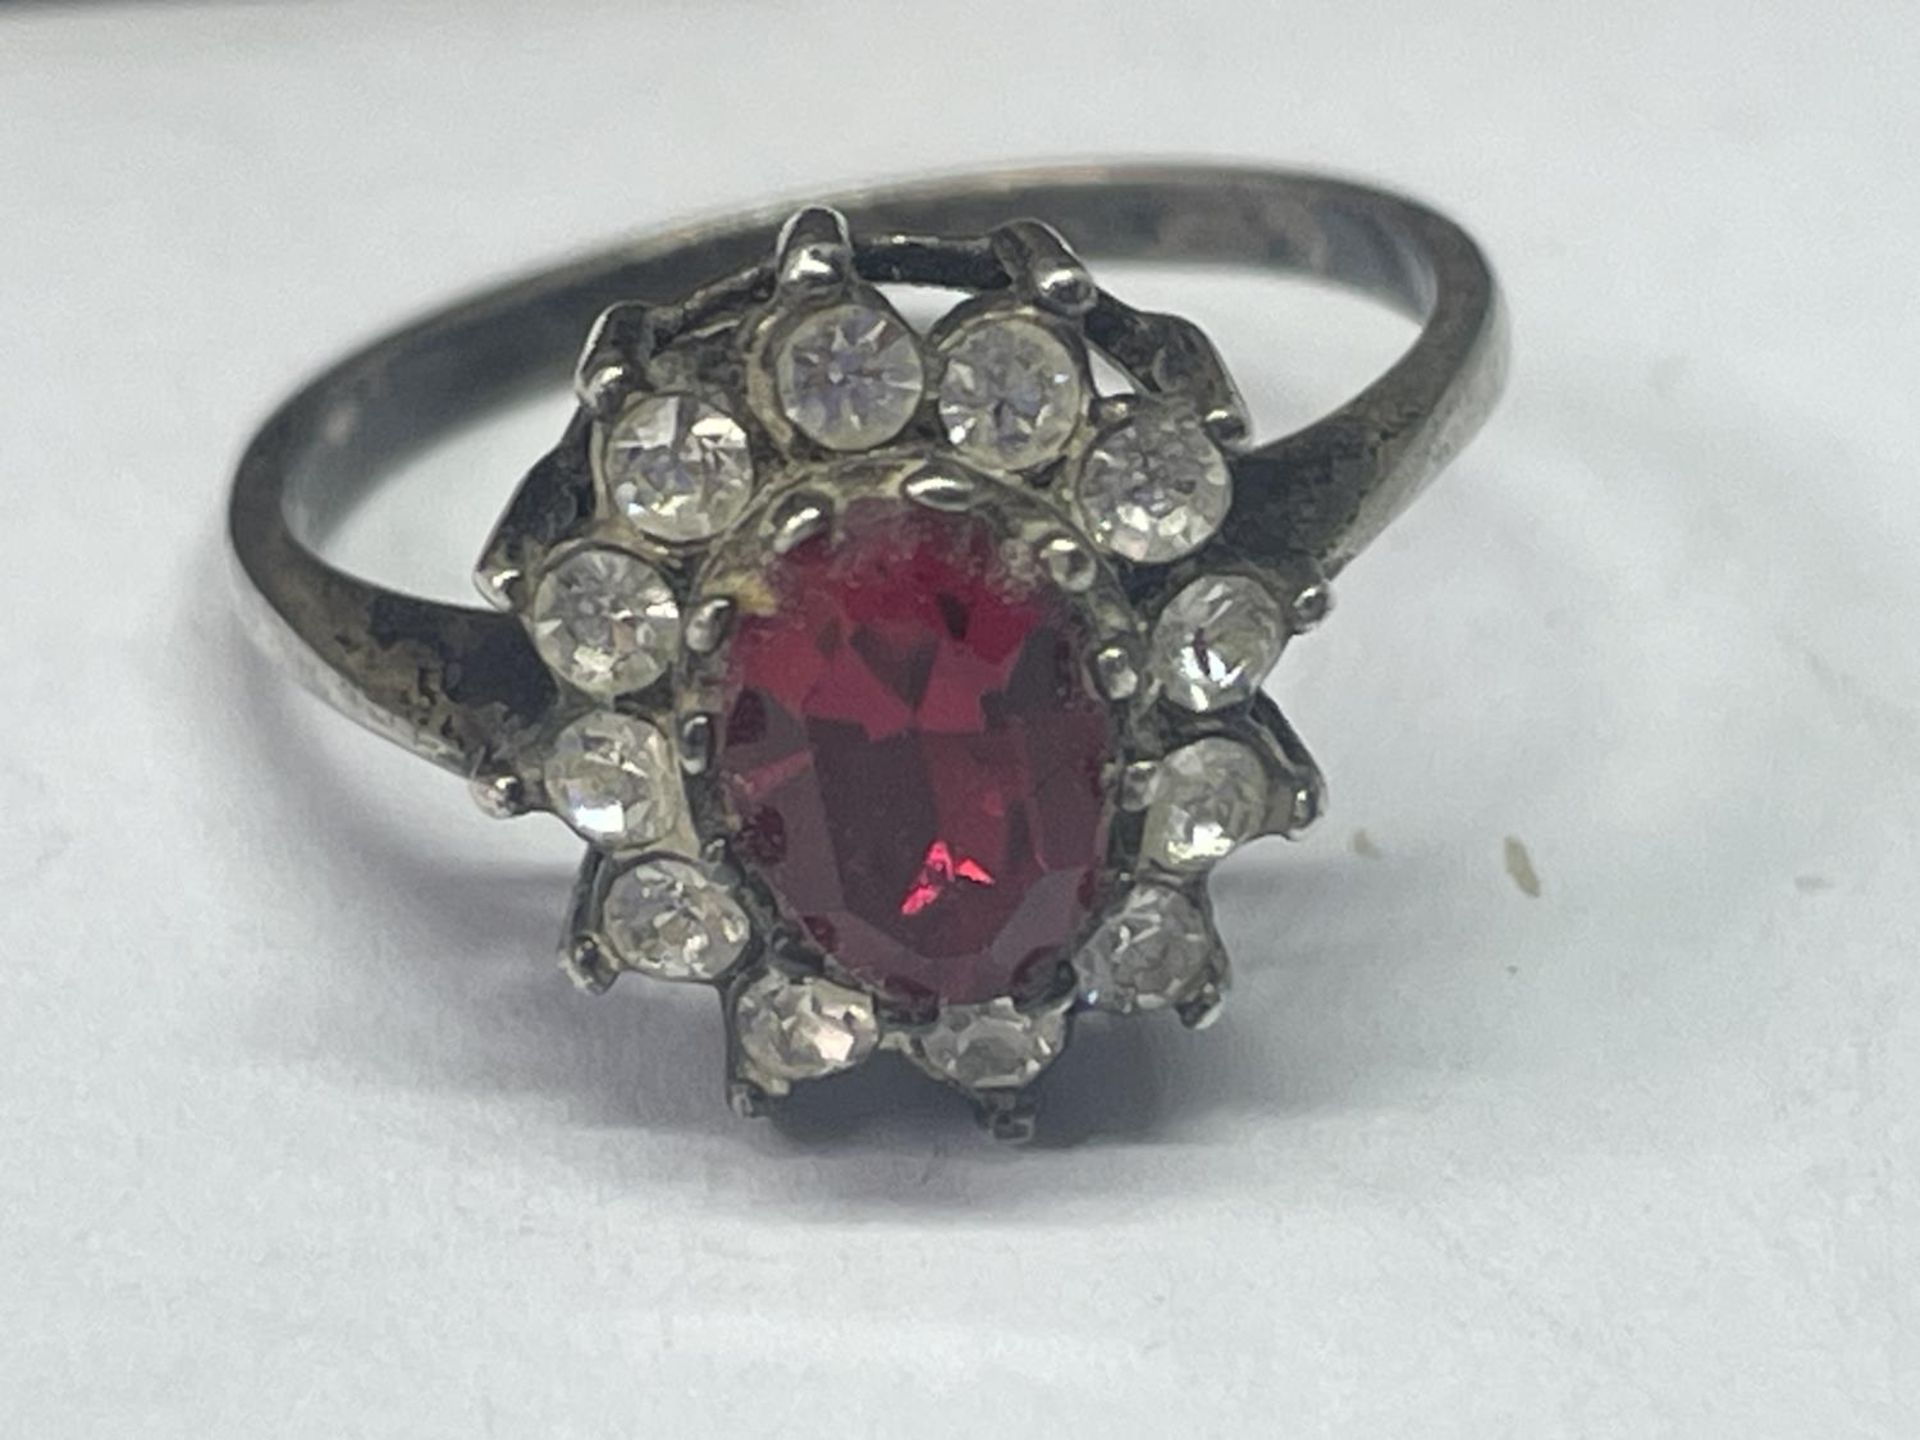 A SILVER RING WITH CENTRE RED STONE SURROUNDED BY CLER STONES IN A PRESENTATION BOX - Image 2 of 3